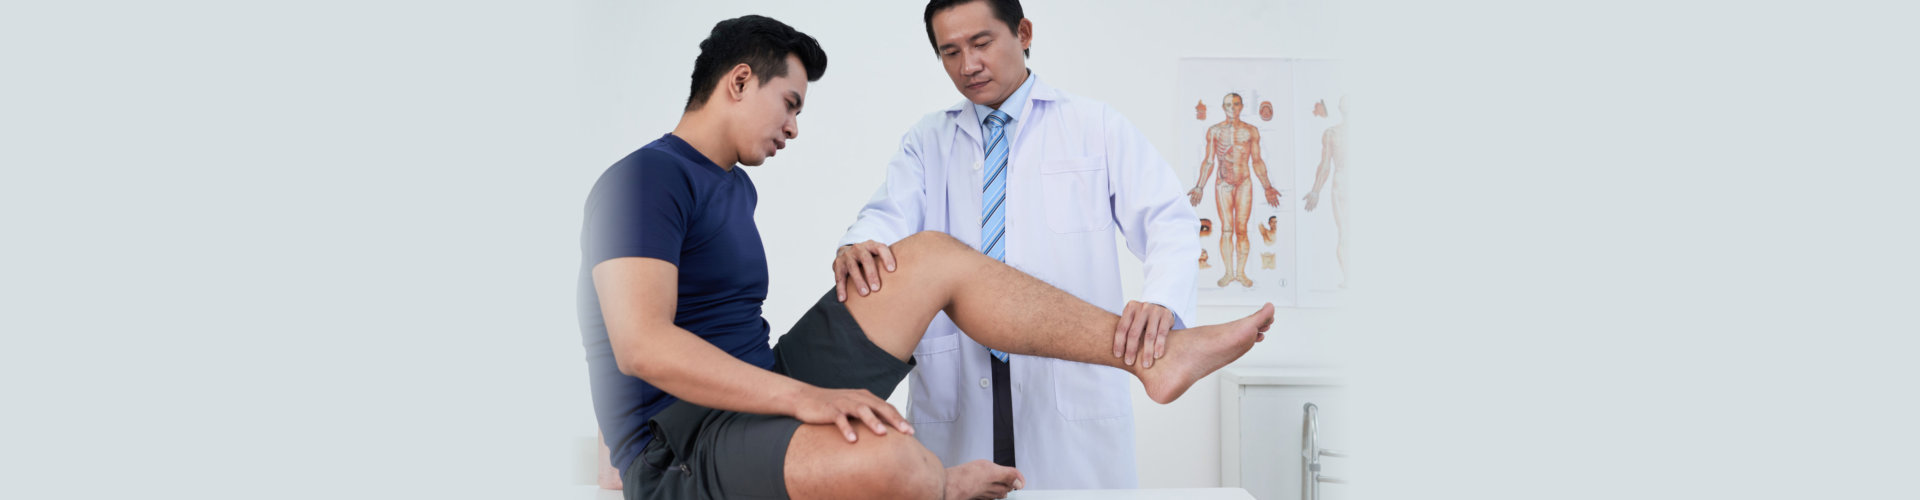 Physiotherapist examining young sportsman with trauma of leg